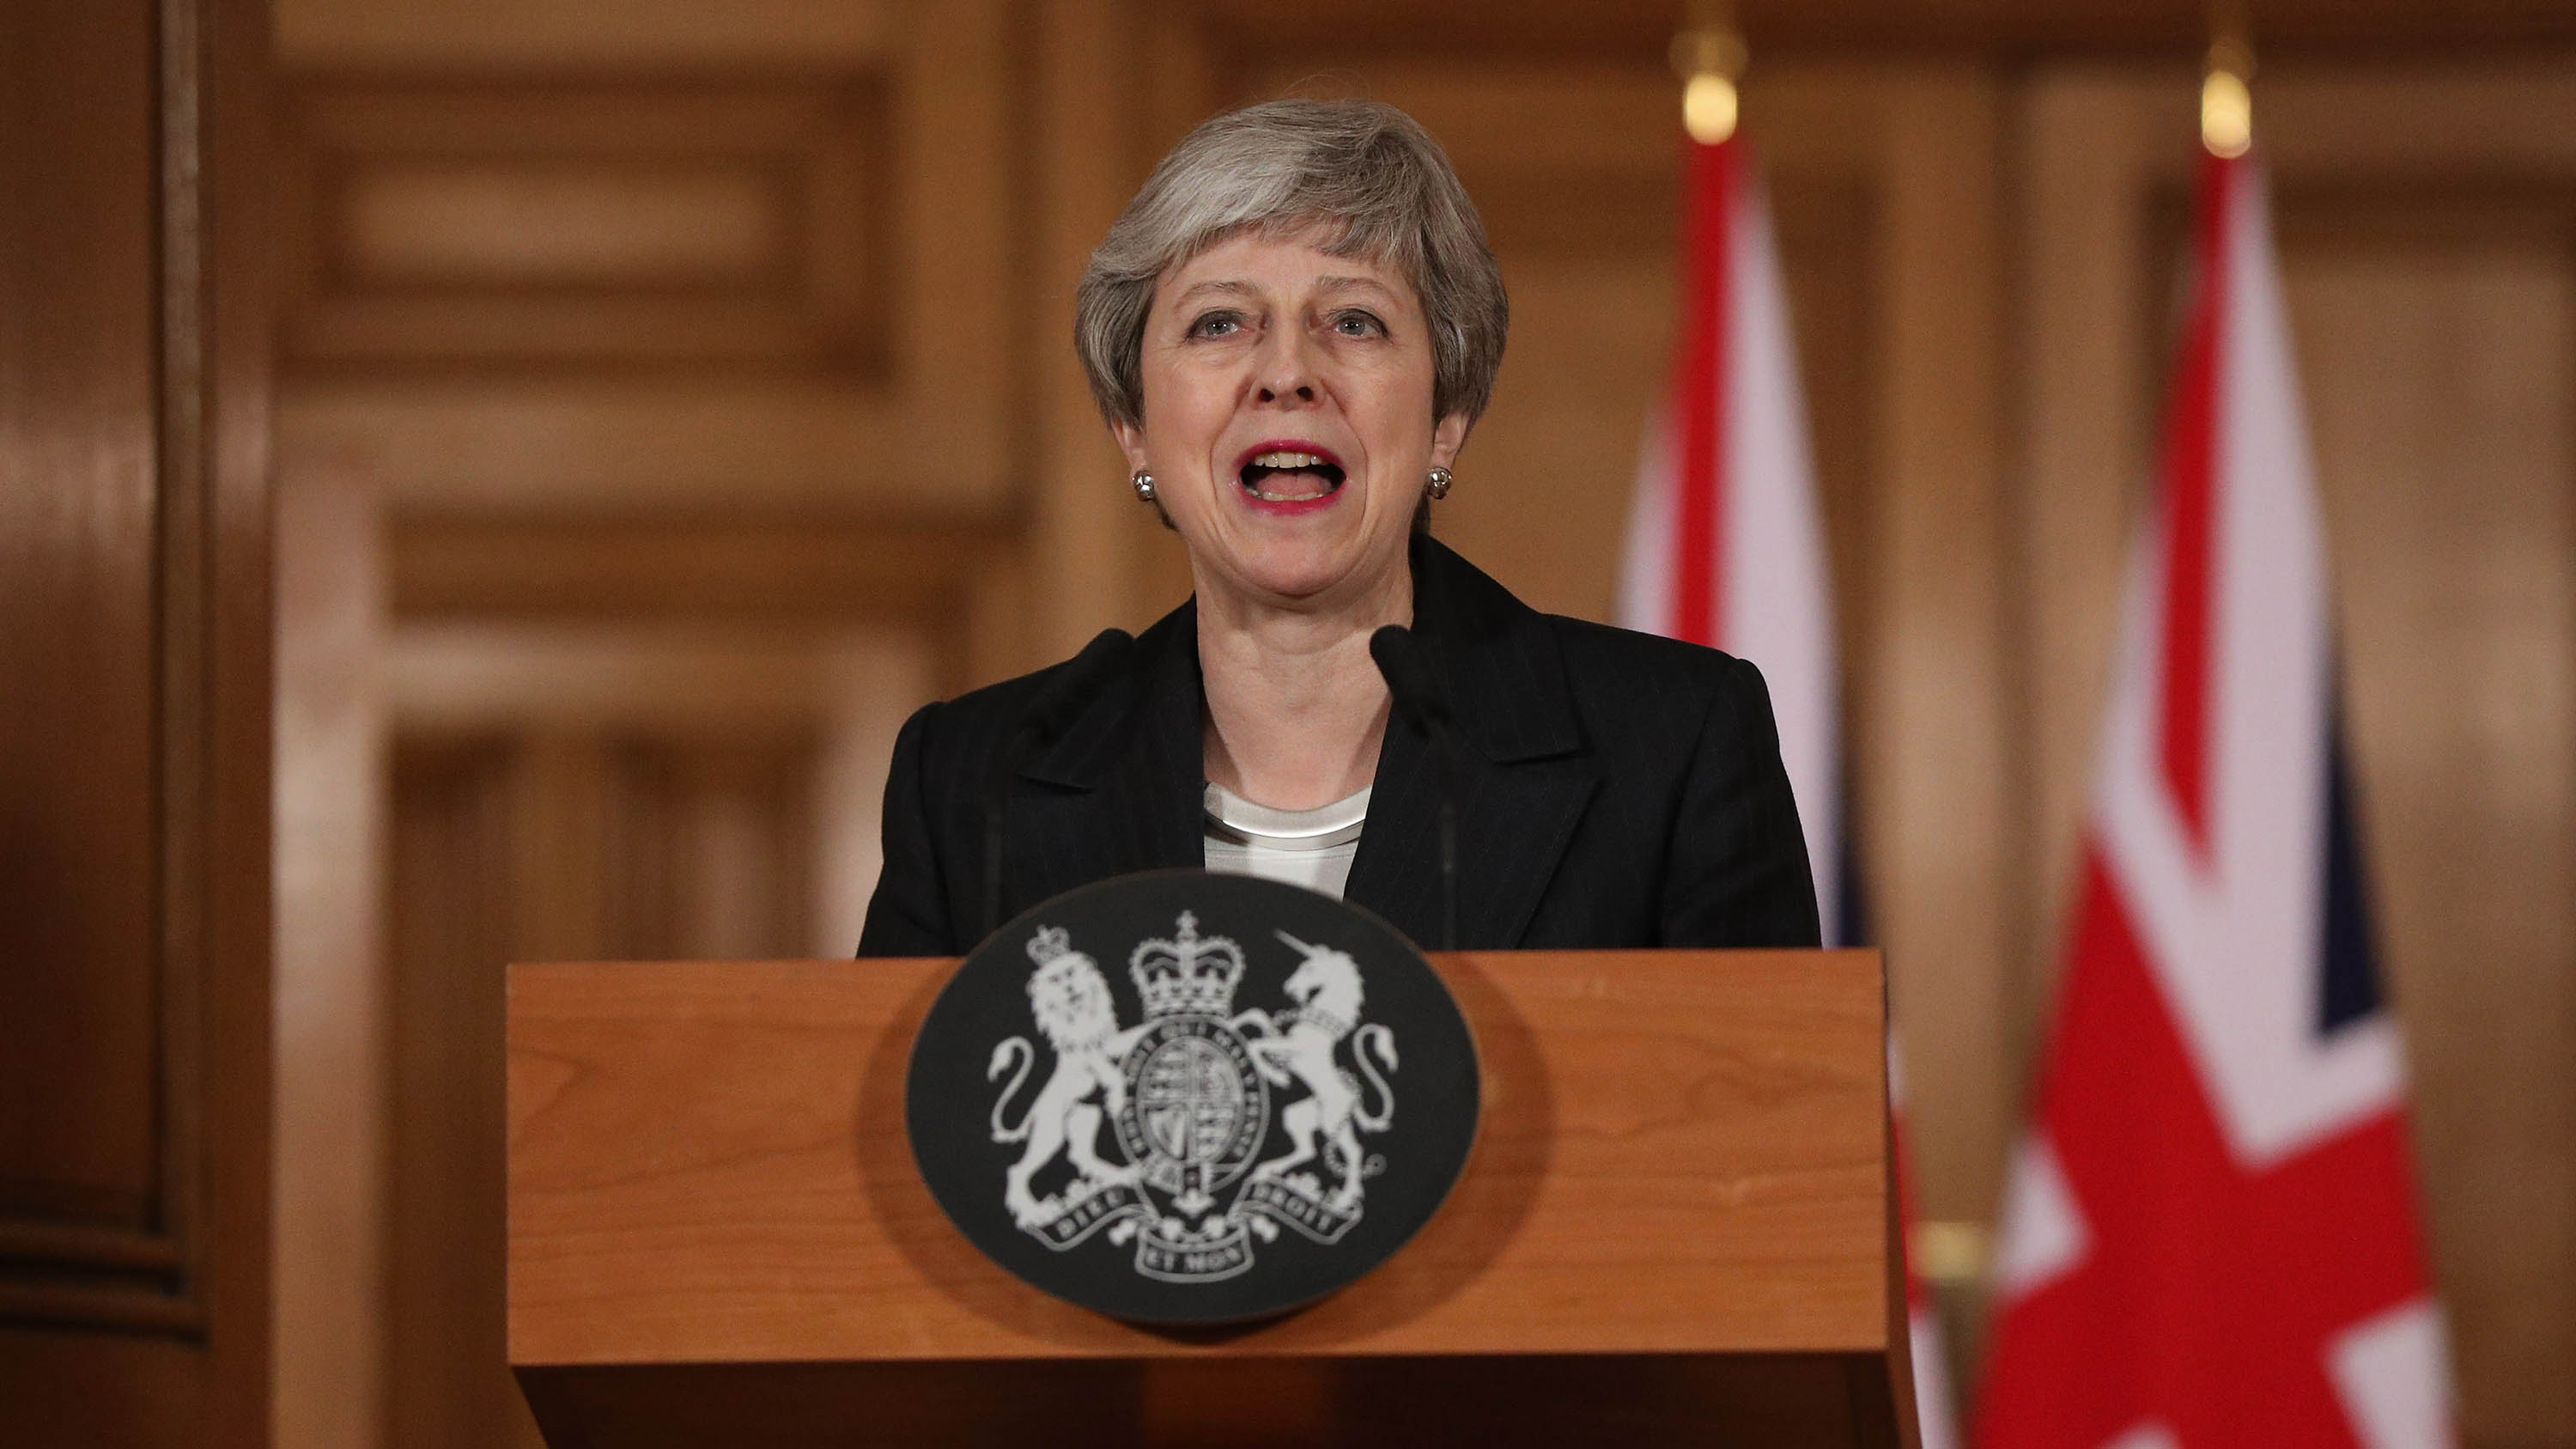 Prime Minister Theresa May during her statement to the nation.